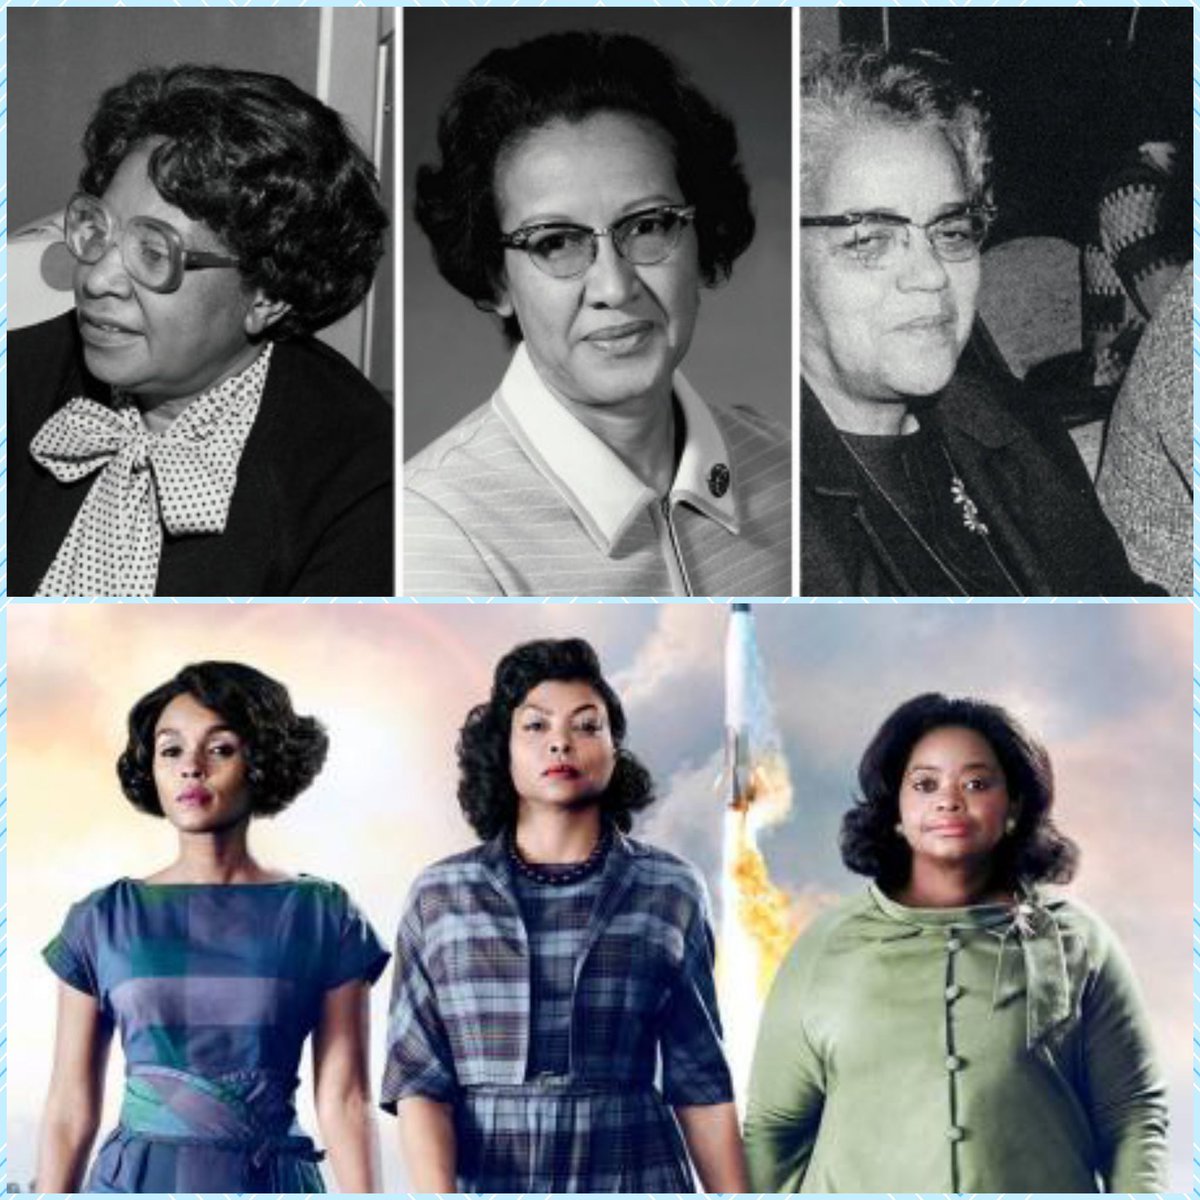 Pictures of Dorothy Vaughan, Mary Jackson, and Katherine Gobels Johnson above the movie poster for Hidden Figures.